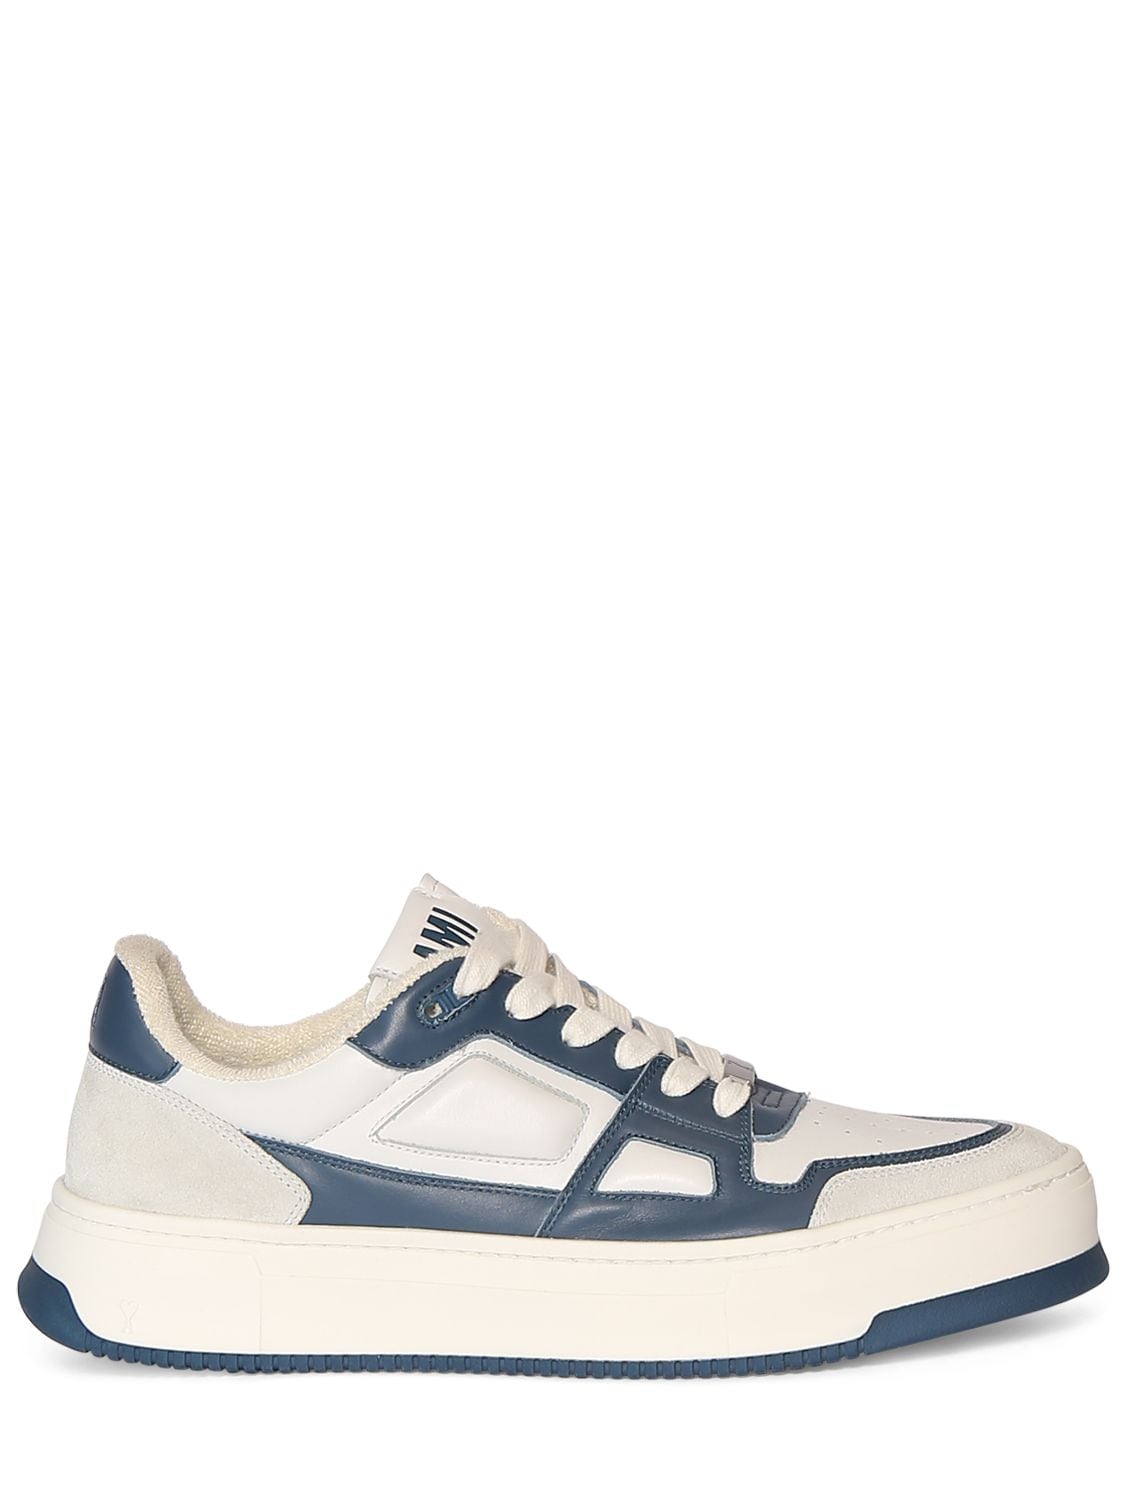 Ami Alexandre Mattiussi New Arcade Leather Low Top Trainers In White,blue